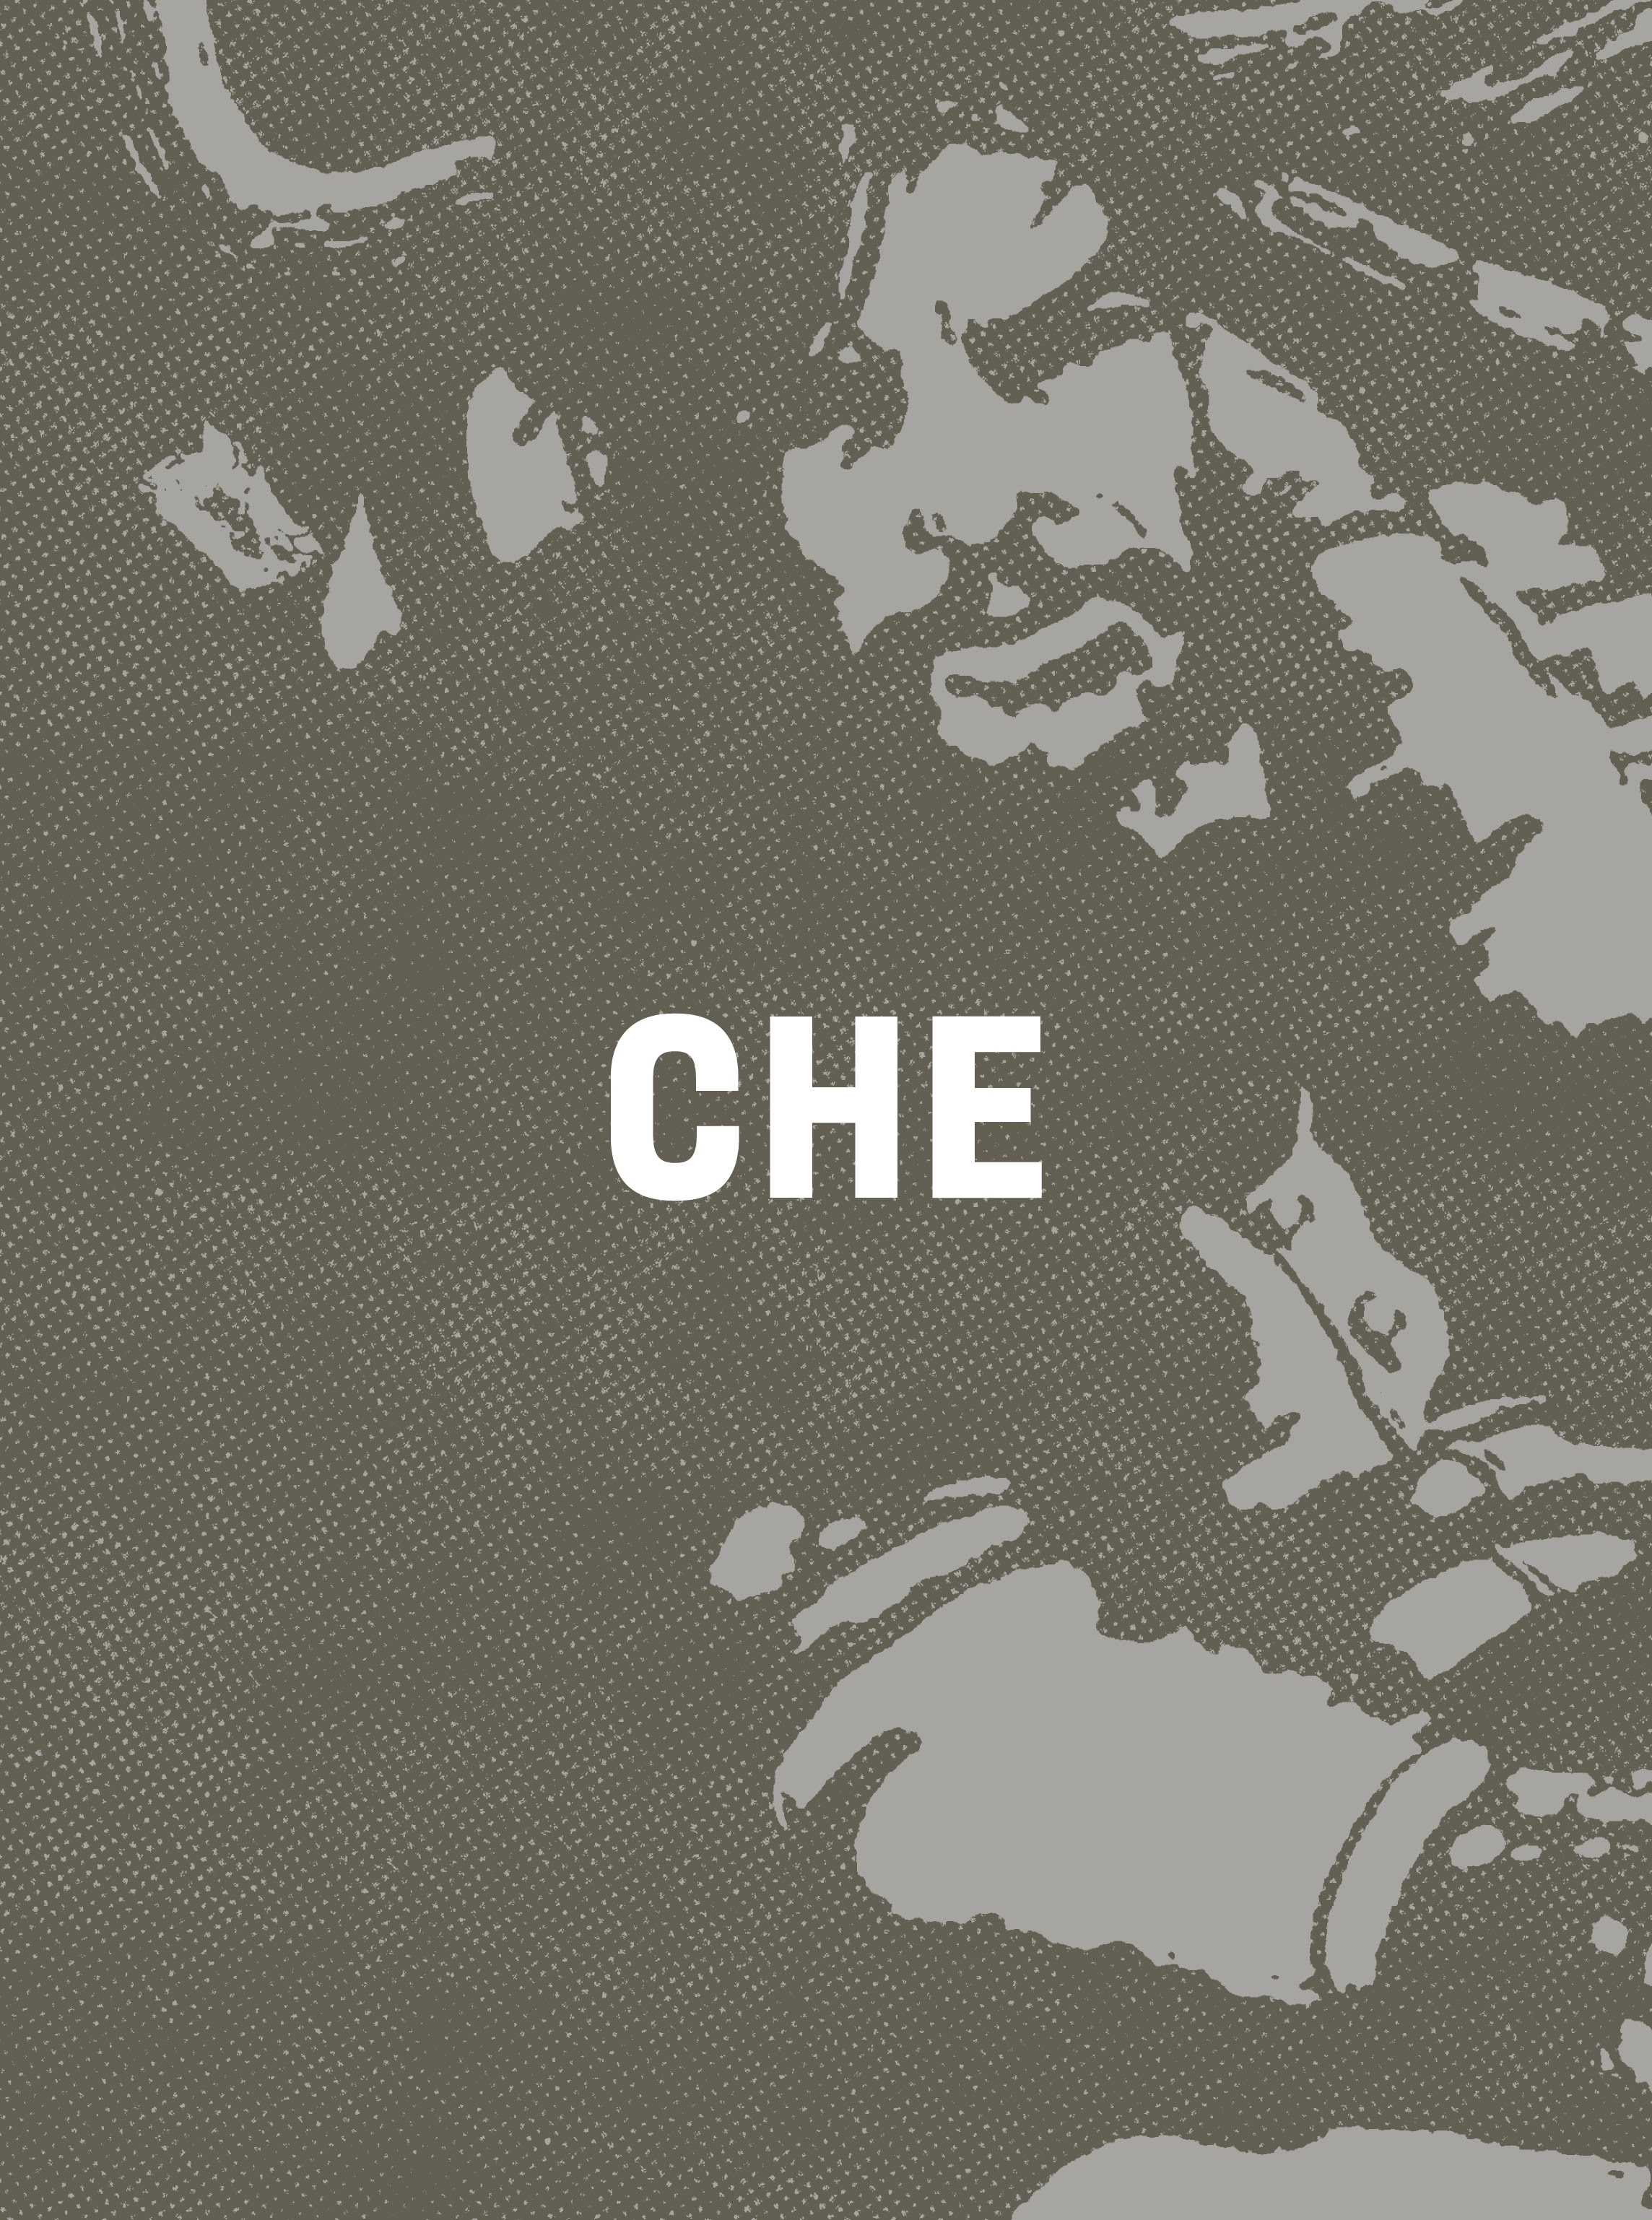 Read online Life of Che: An Impressionistic Biography comic -  Issue # TPB - 27